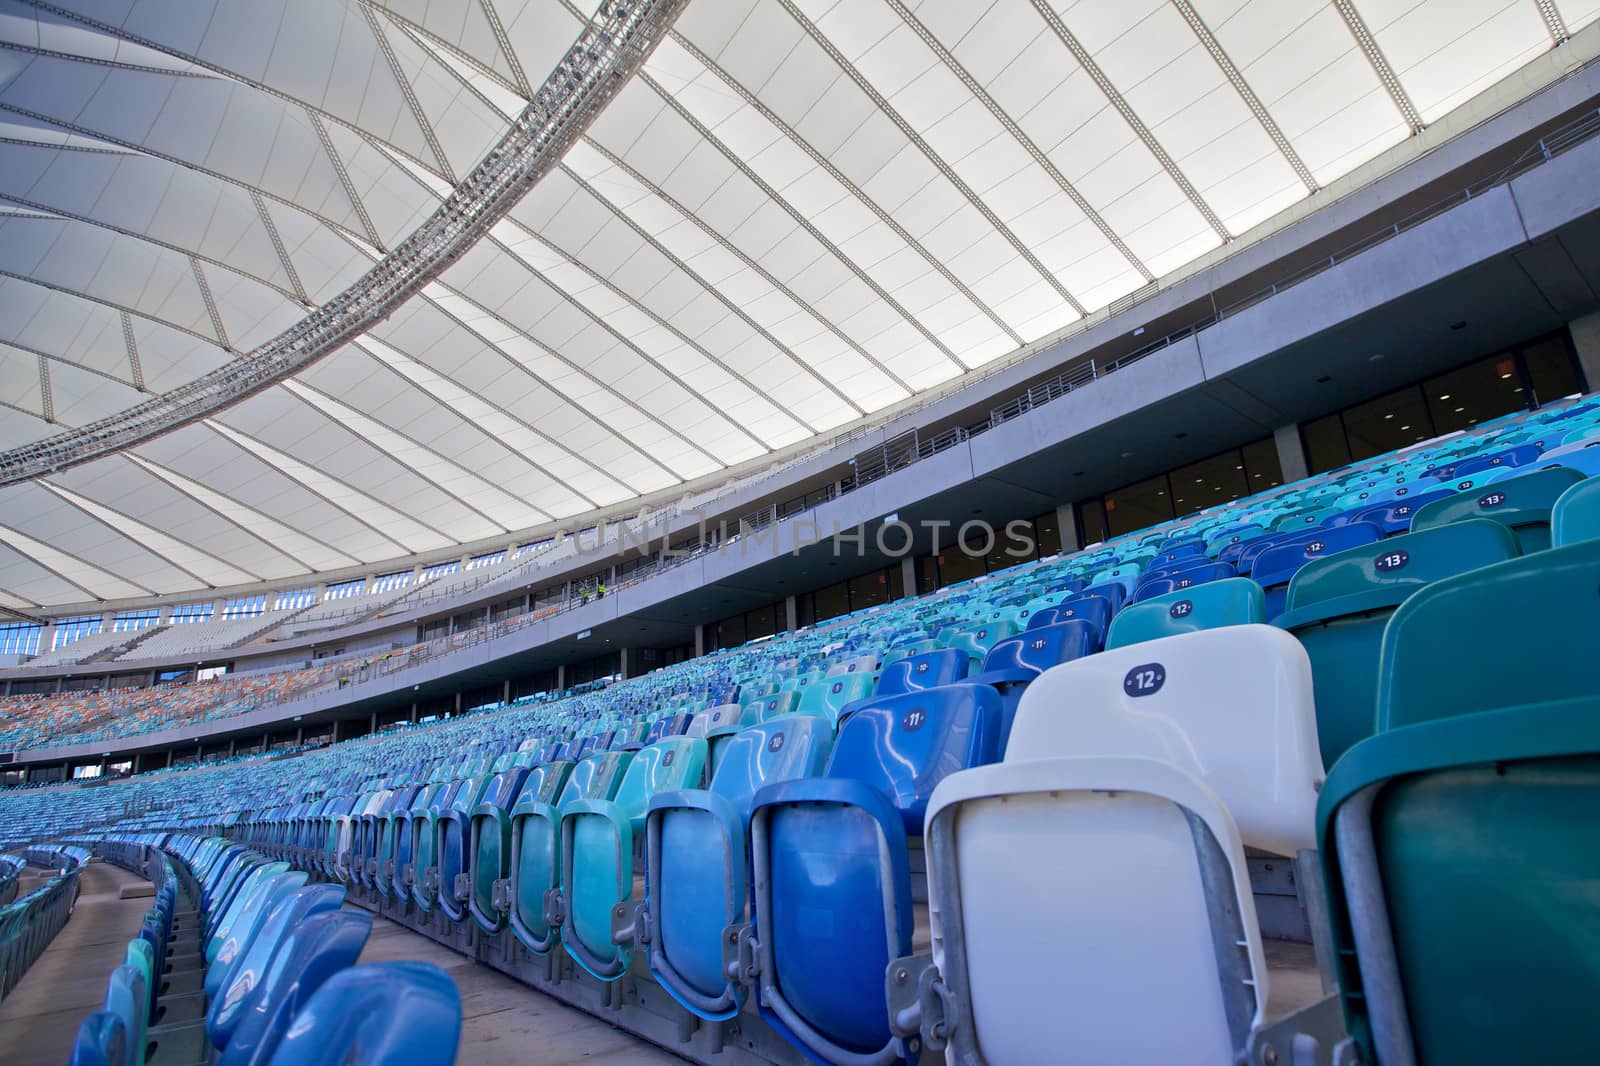 Inside stadiums in Durban, South Africa.  Seating area and covered by the sails roofing